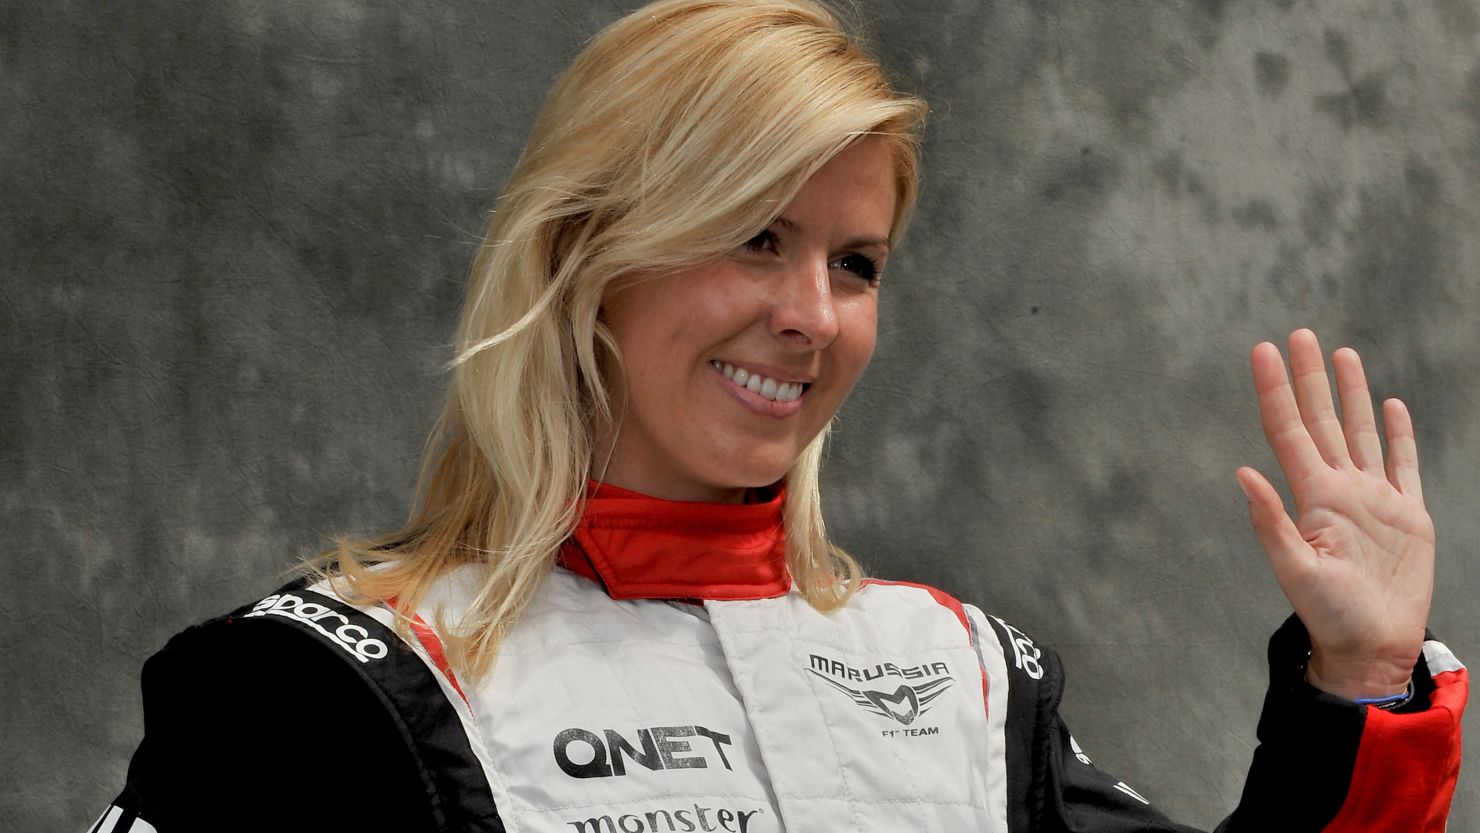 Marussia test driver Maria de Villota has been discharged from hospital in the UK and returned home to Spain